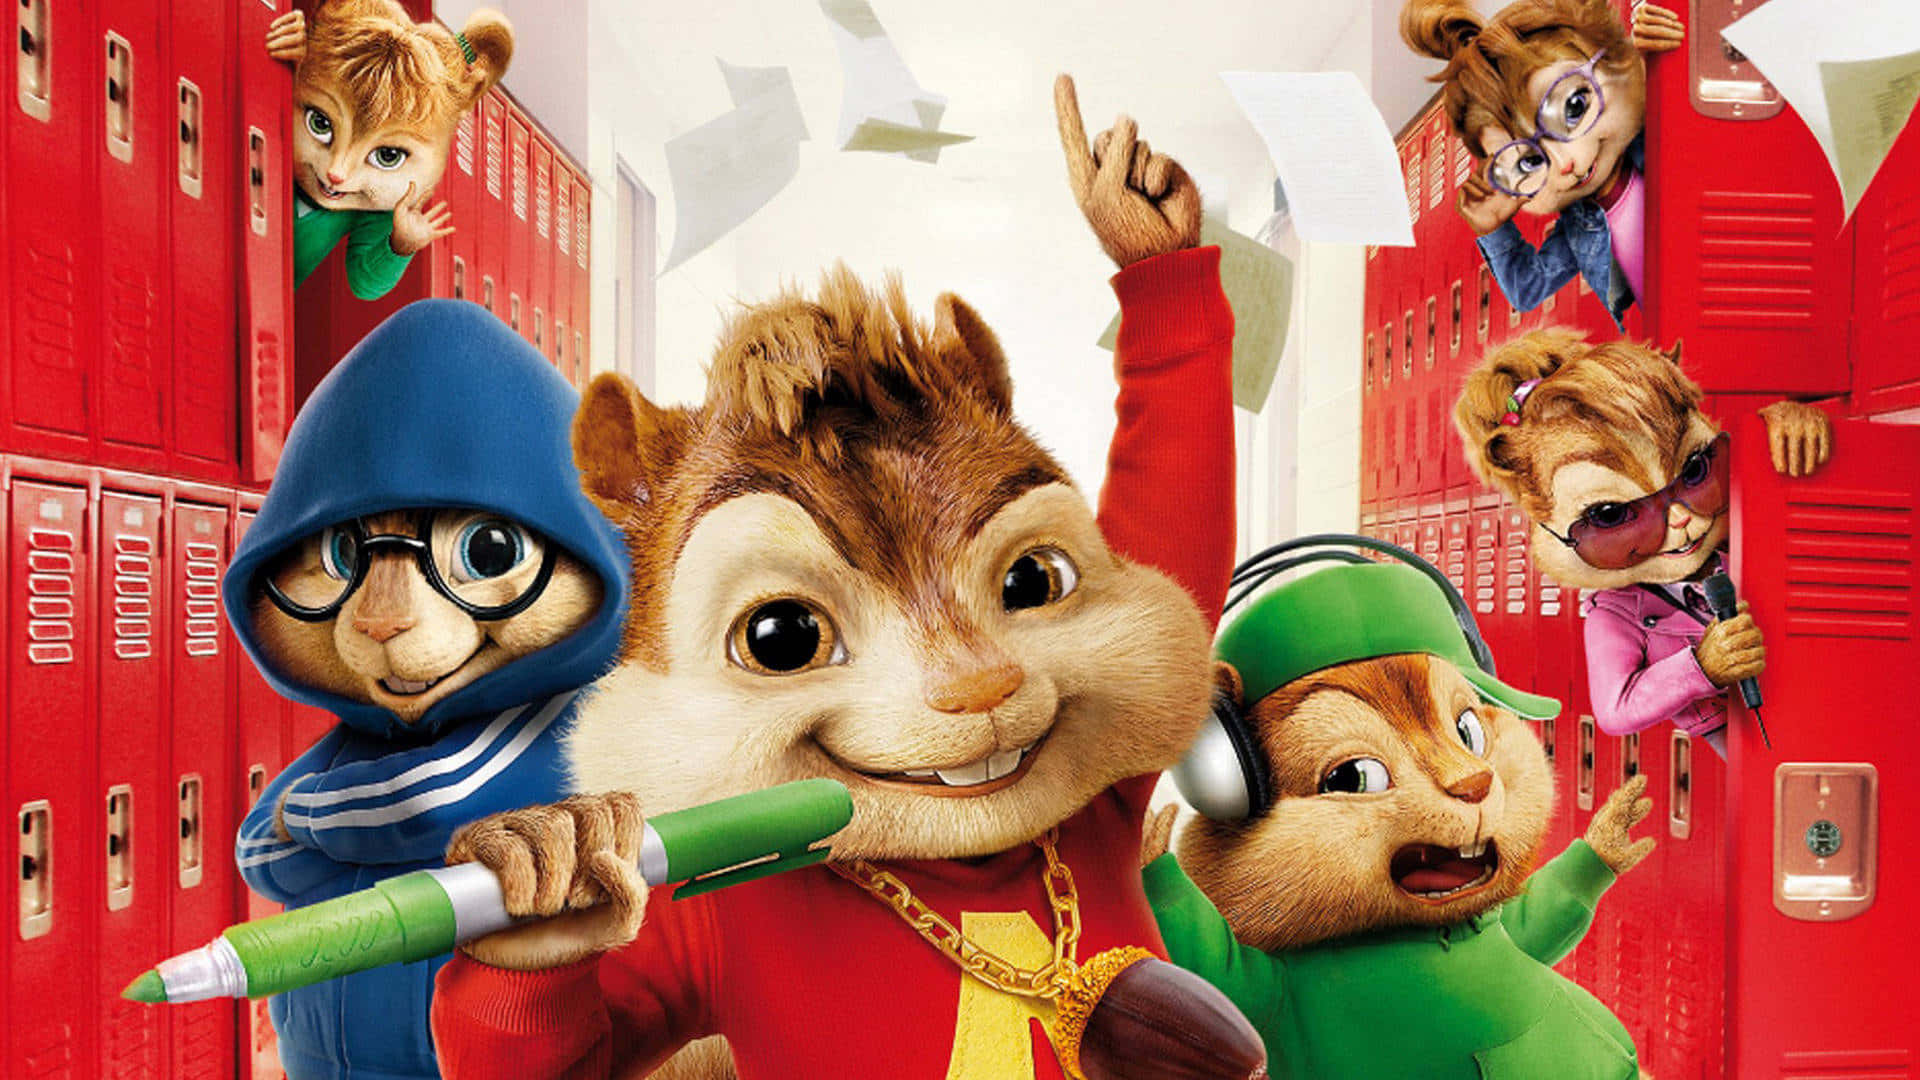 The lovable Alvin and his pals